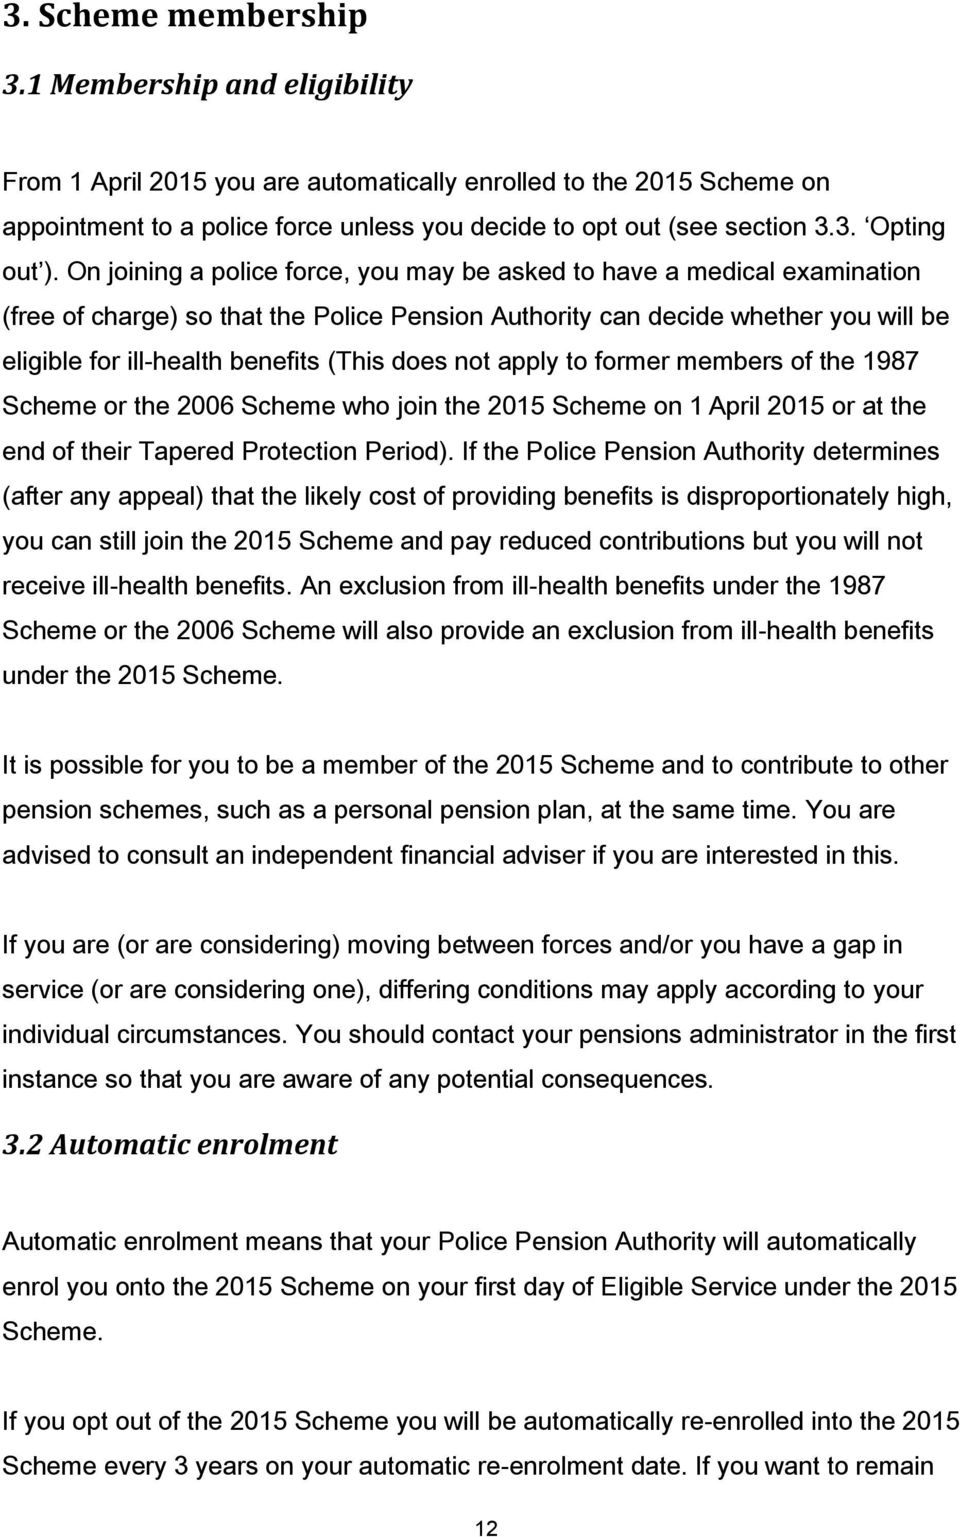 does not apply to former members of the 1987 Scheme or the 2006 Scheme who join the 2015 Scheme on 1 April 2015 or at the end of their Tapered Protection Period).